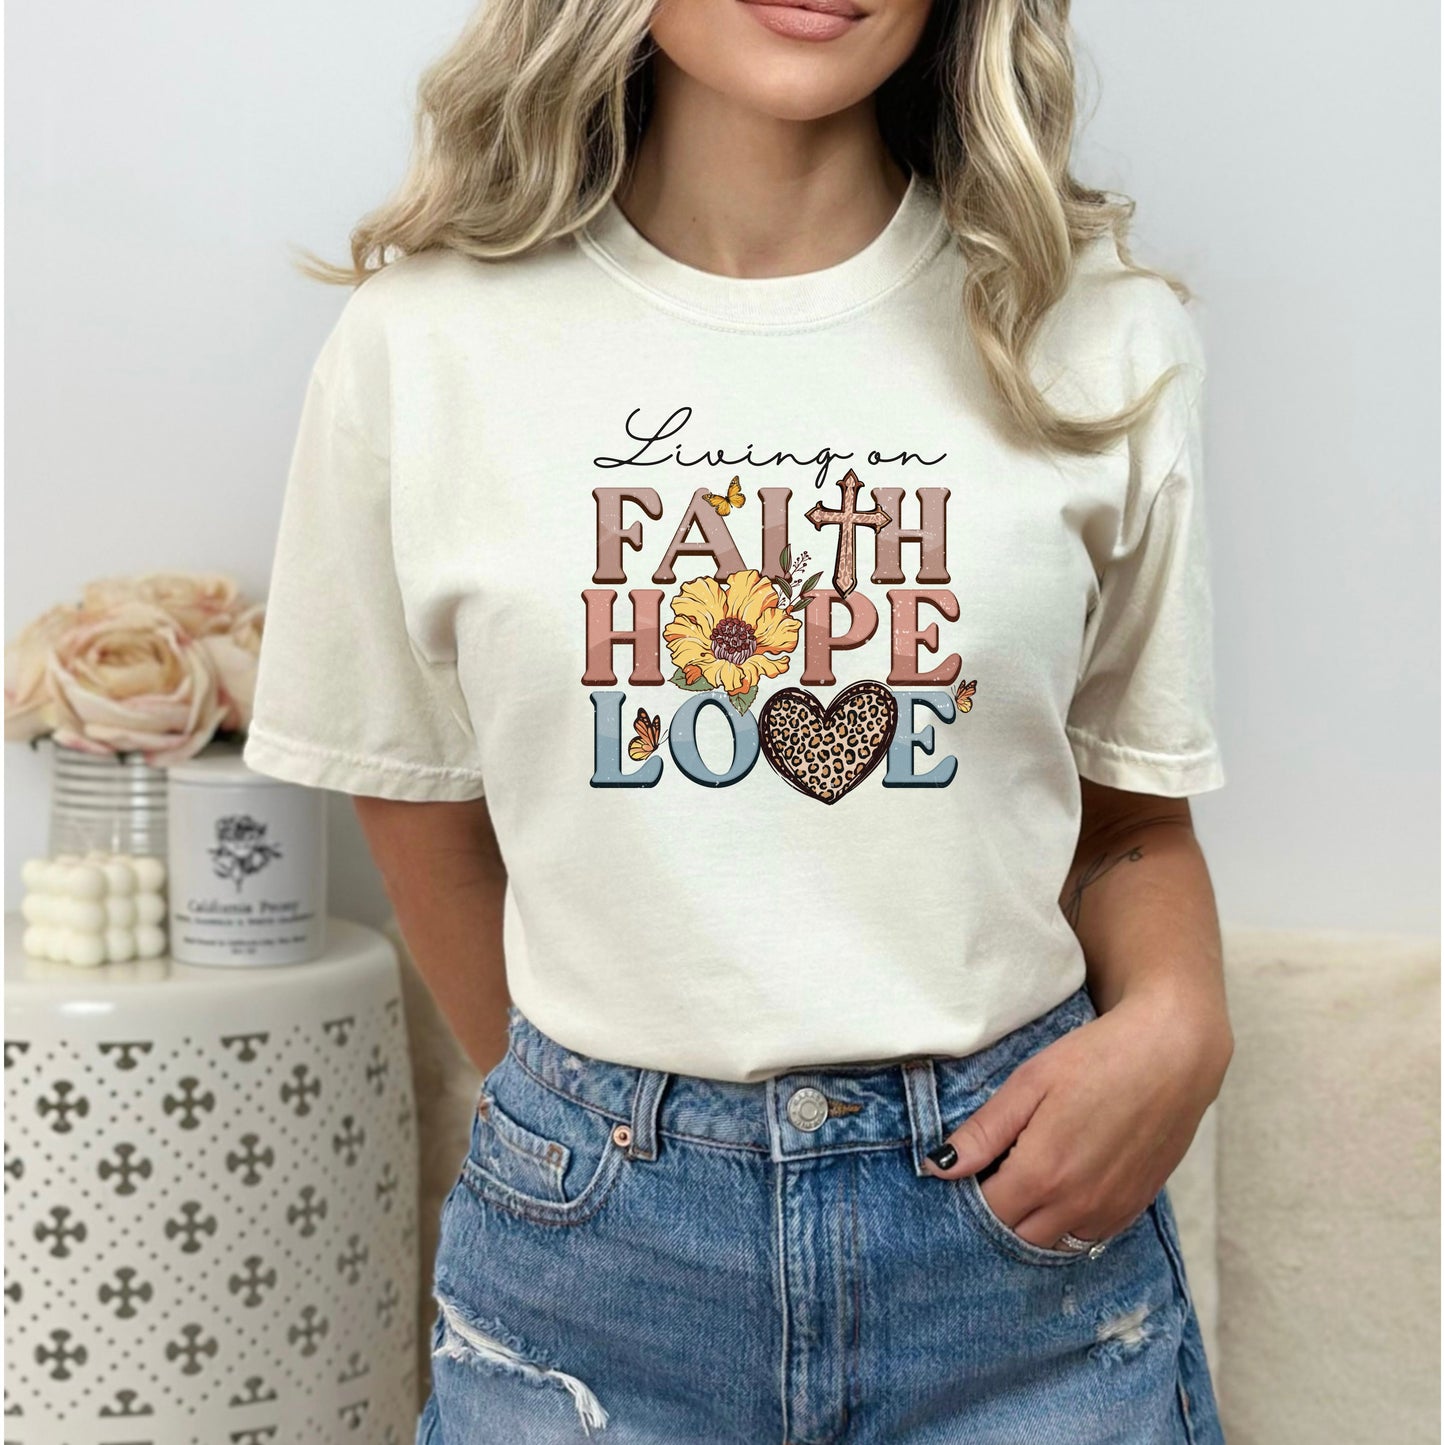 Living on Faith Hope Love T-shirt, Inspirational T-Shirt, Faith Hope Love Shirt, Religious T-Shirt, Gifts For Her, Gifts For Mom, Inspiring